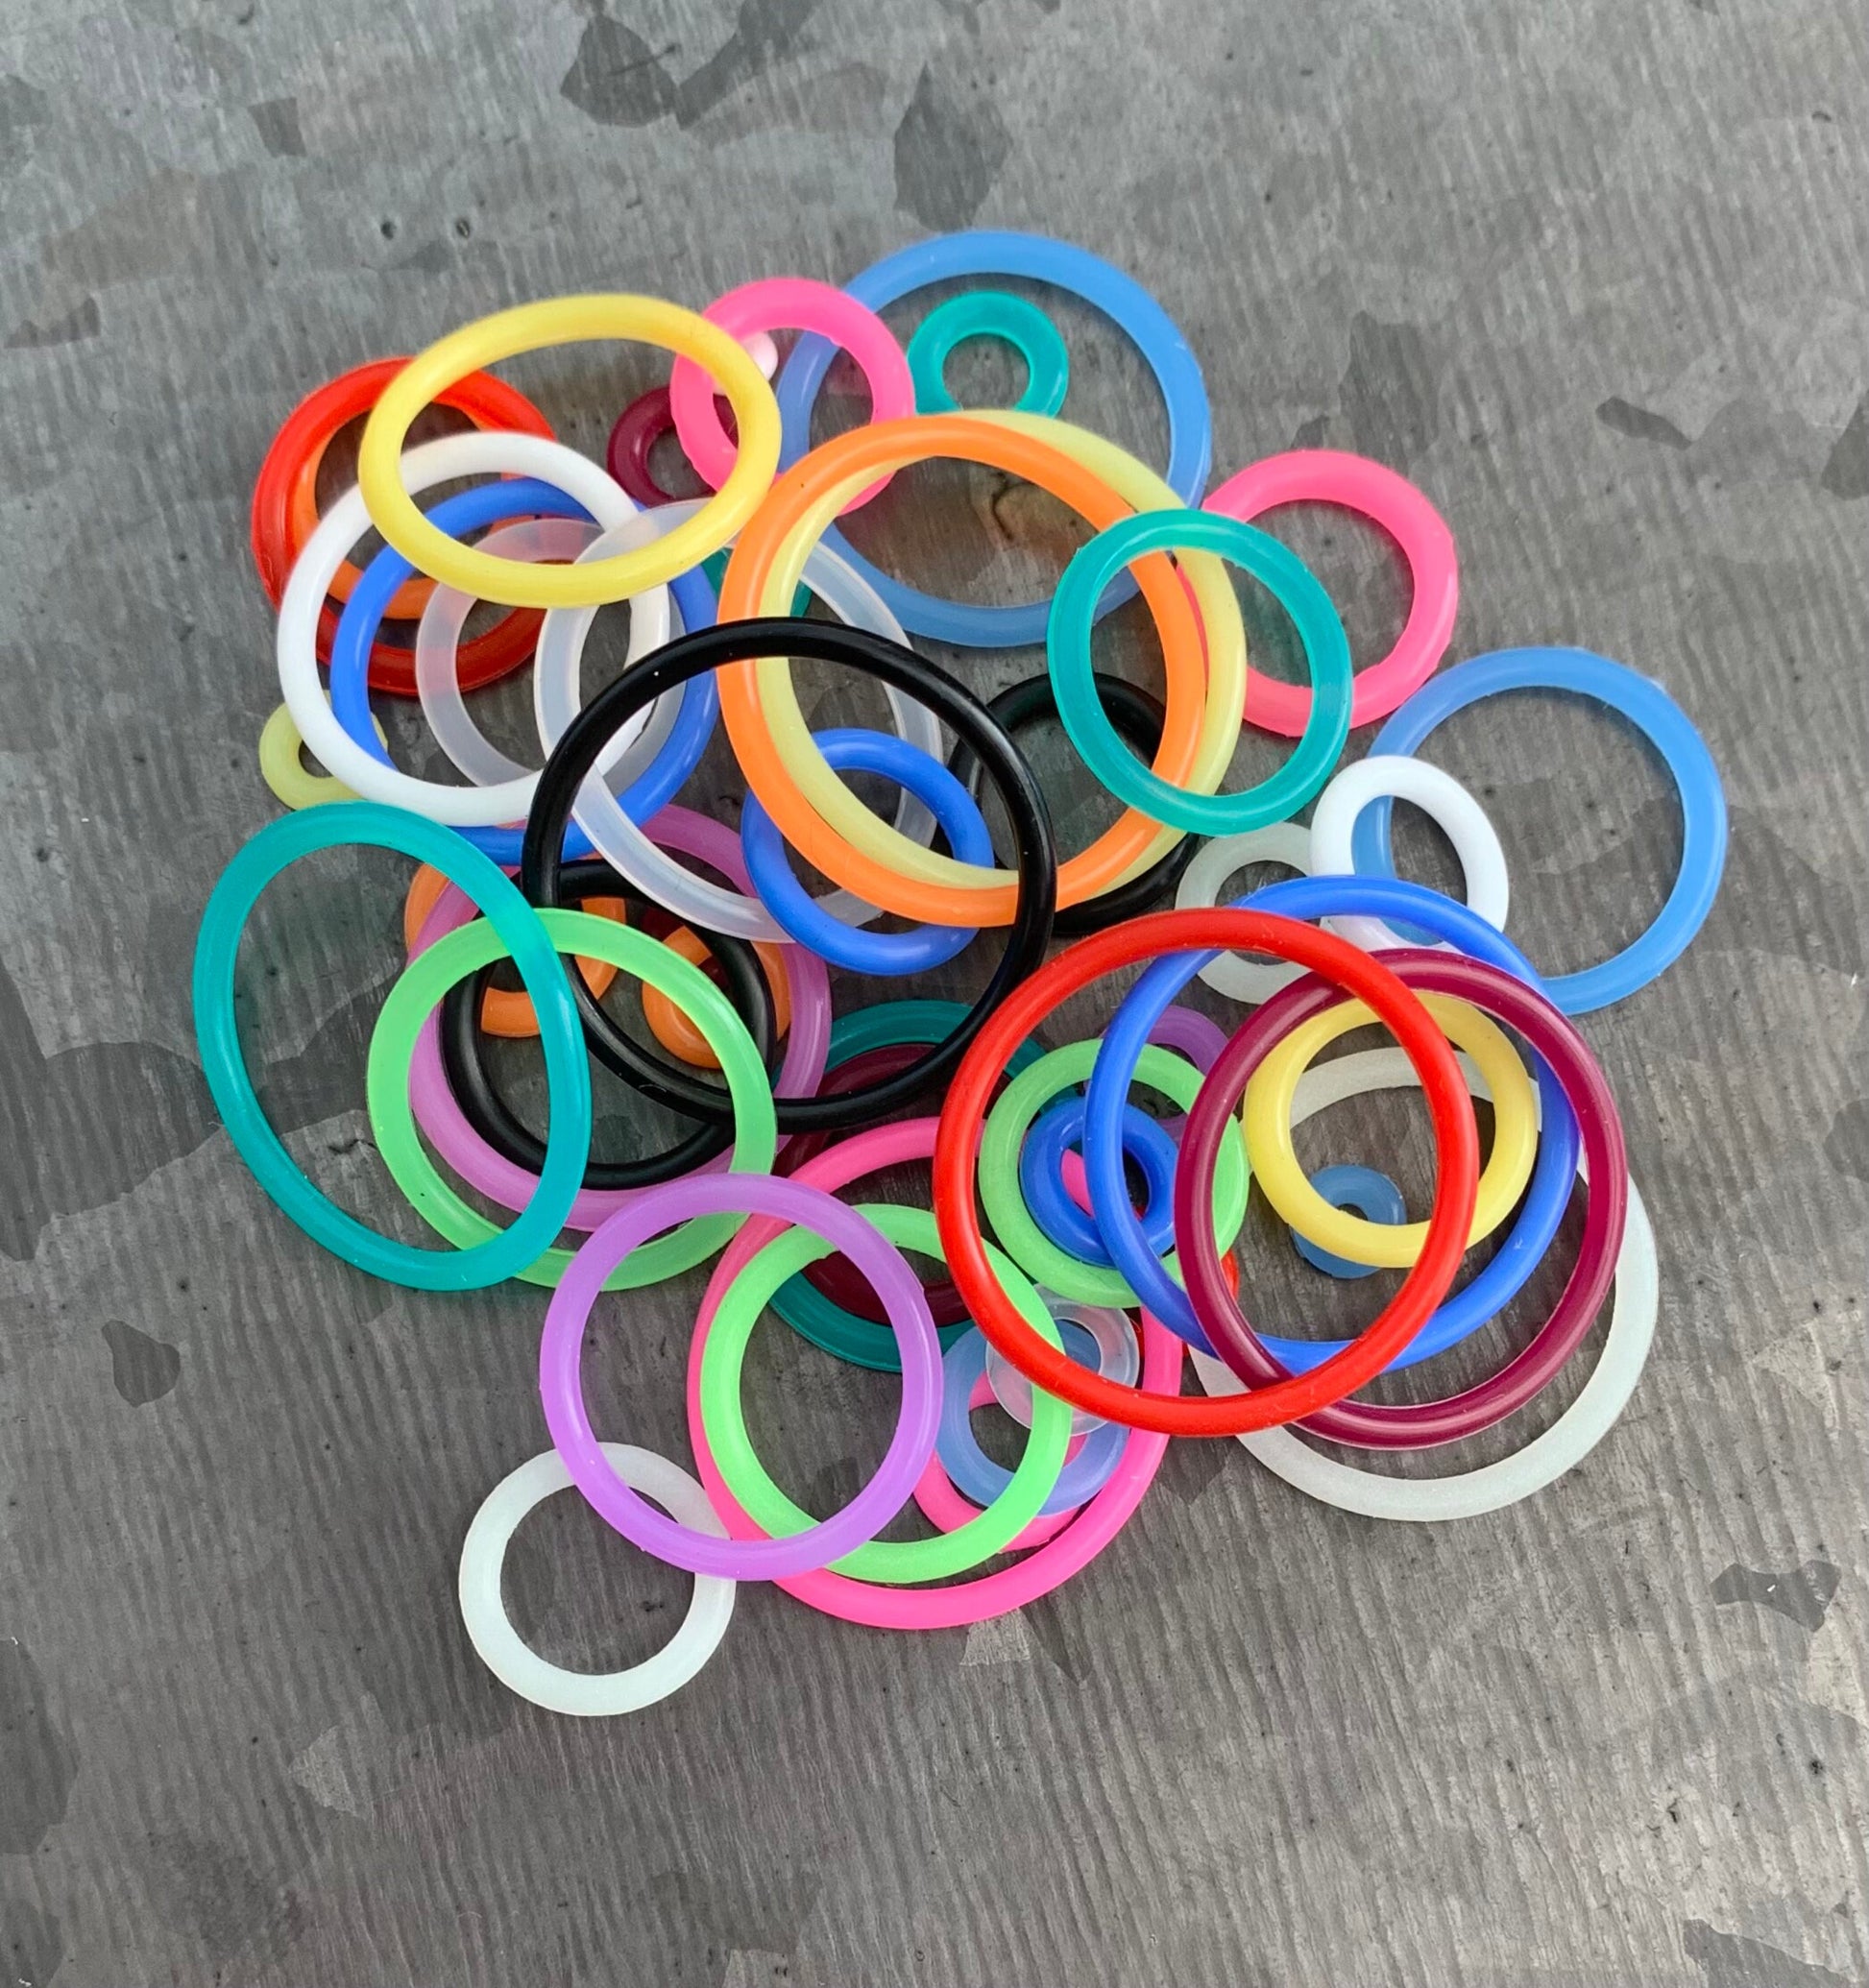 10 pack of Yellow Replacement O-Rings Bands for Plugs or Tunnels - 13 more colors available!